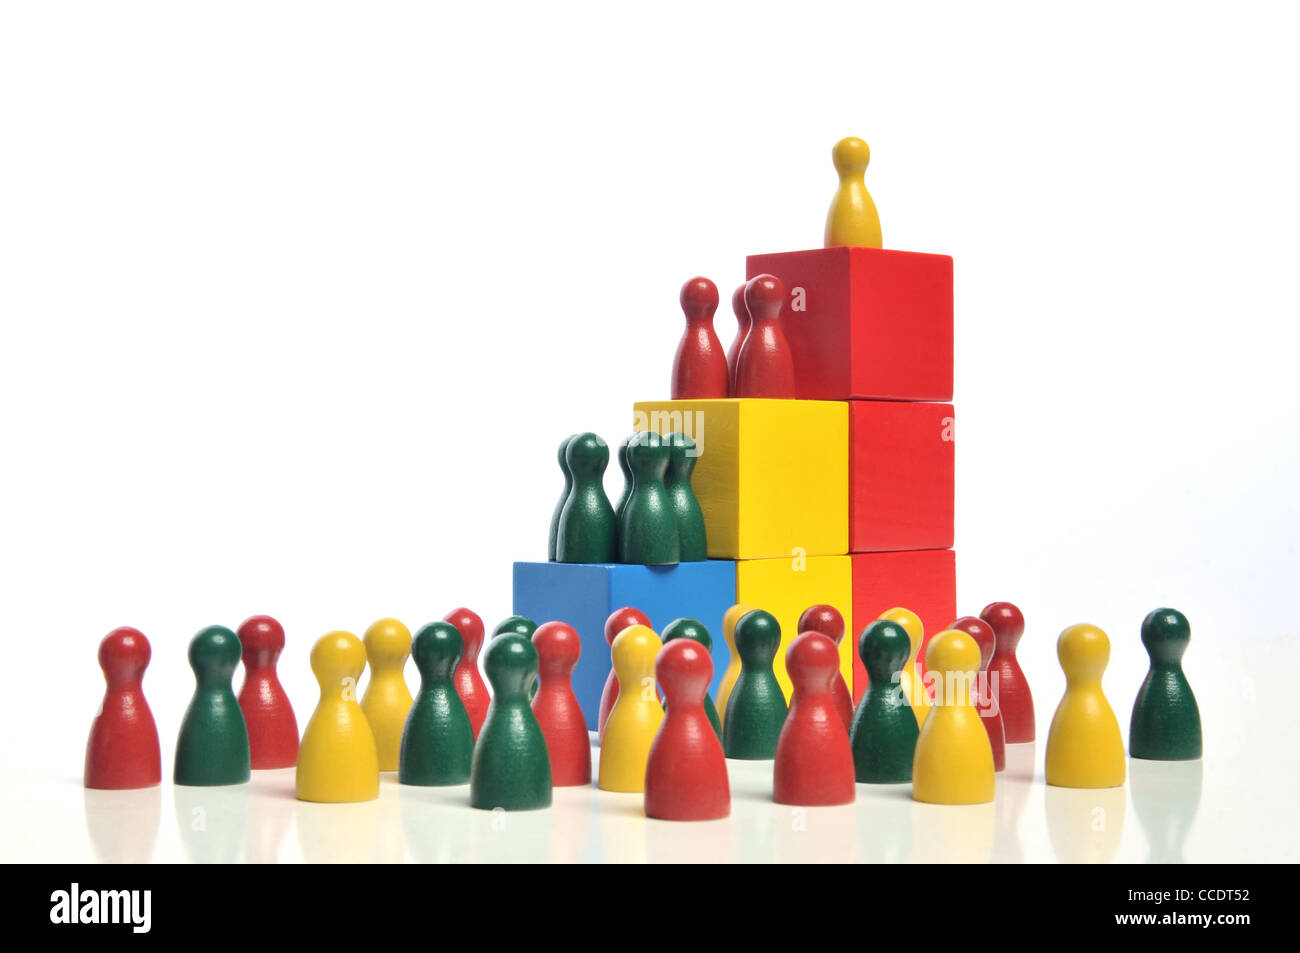 Hierarchy - Multicolored wooden toy blocks and figures on white background Stock Photo